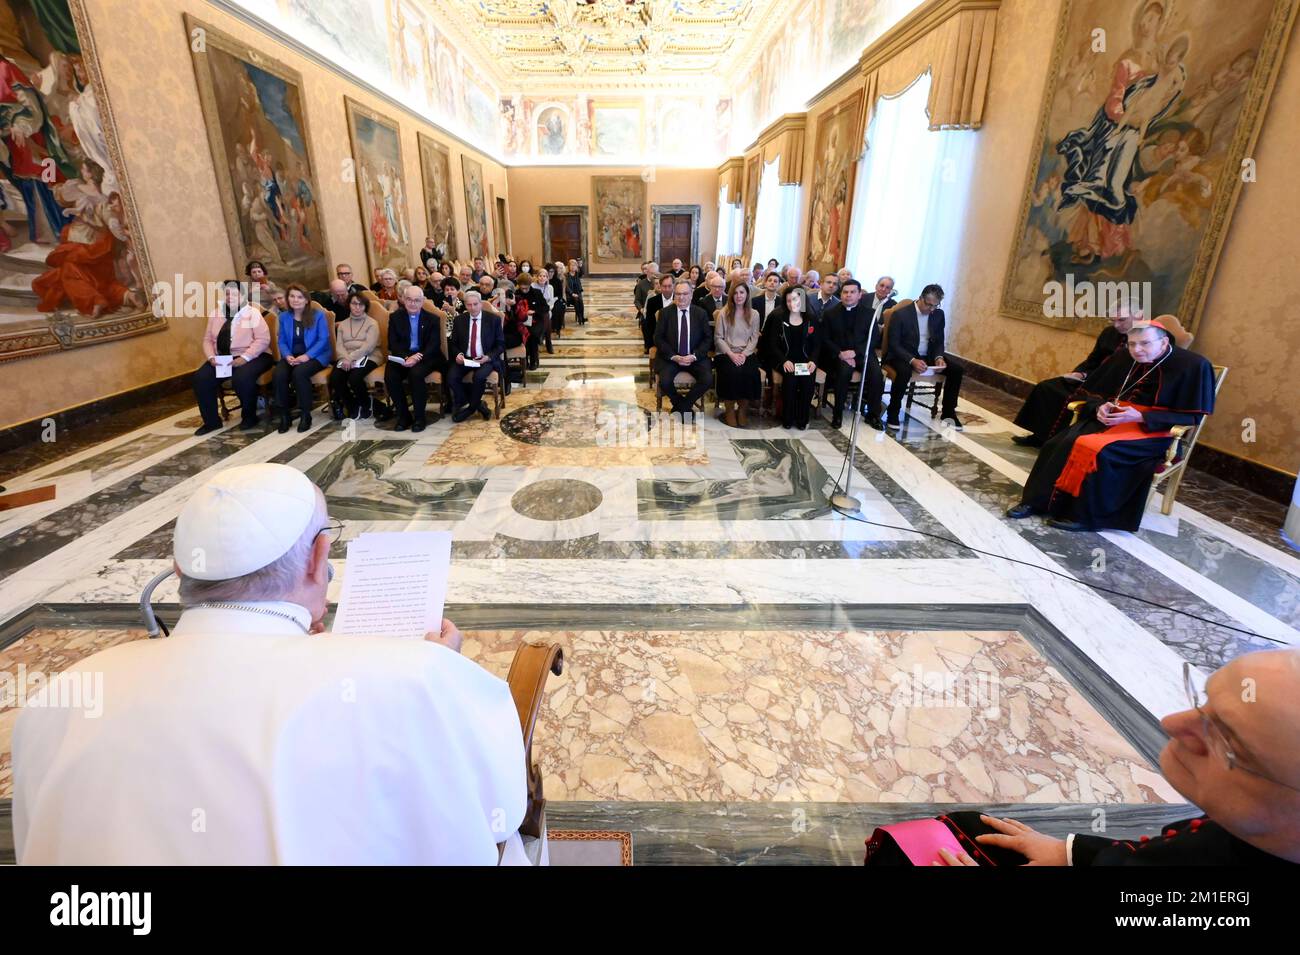 Vatican, Vatican. 12th Dec, 2022. Vatican, 2022/12/12 .Pope Francis receives in audience the Members of the Amitié Judéo-Chrétienne de France at the Vatican Photograph by Vatican Mediia/Catholic Press Photos . RESTRICTED TO EDITORIAL USE - NO MARKETING - NO ADVERTISING CAMPAIGNS. Credit: Independent Photo Agency/Alamy Live News Stock Photo